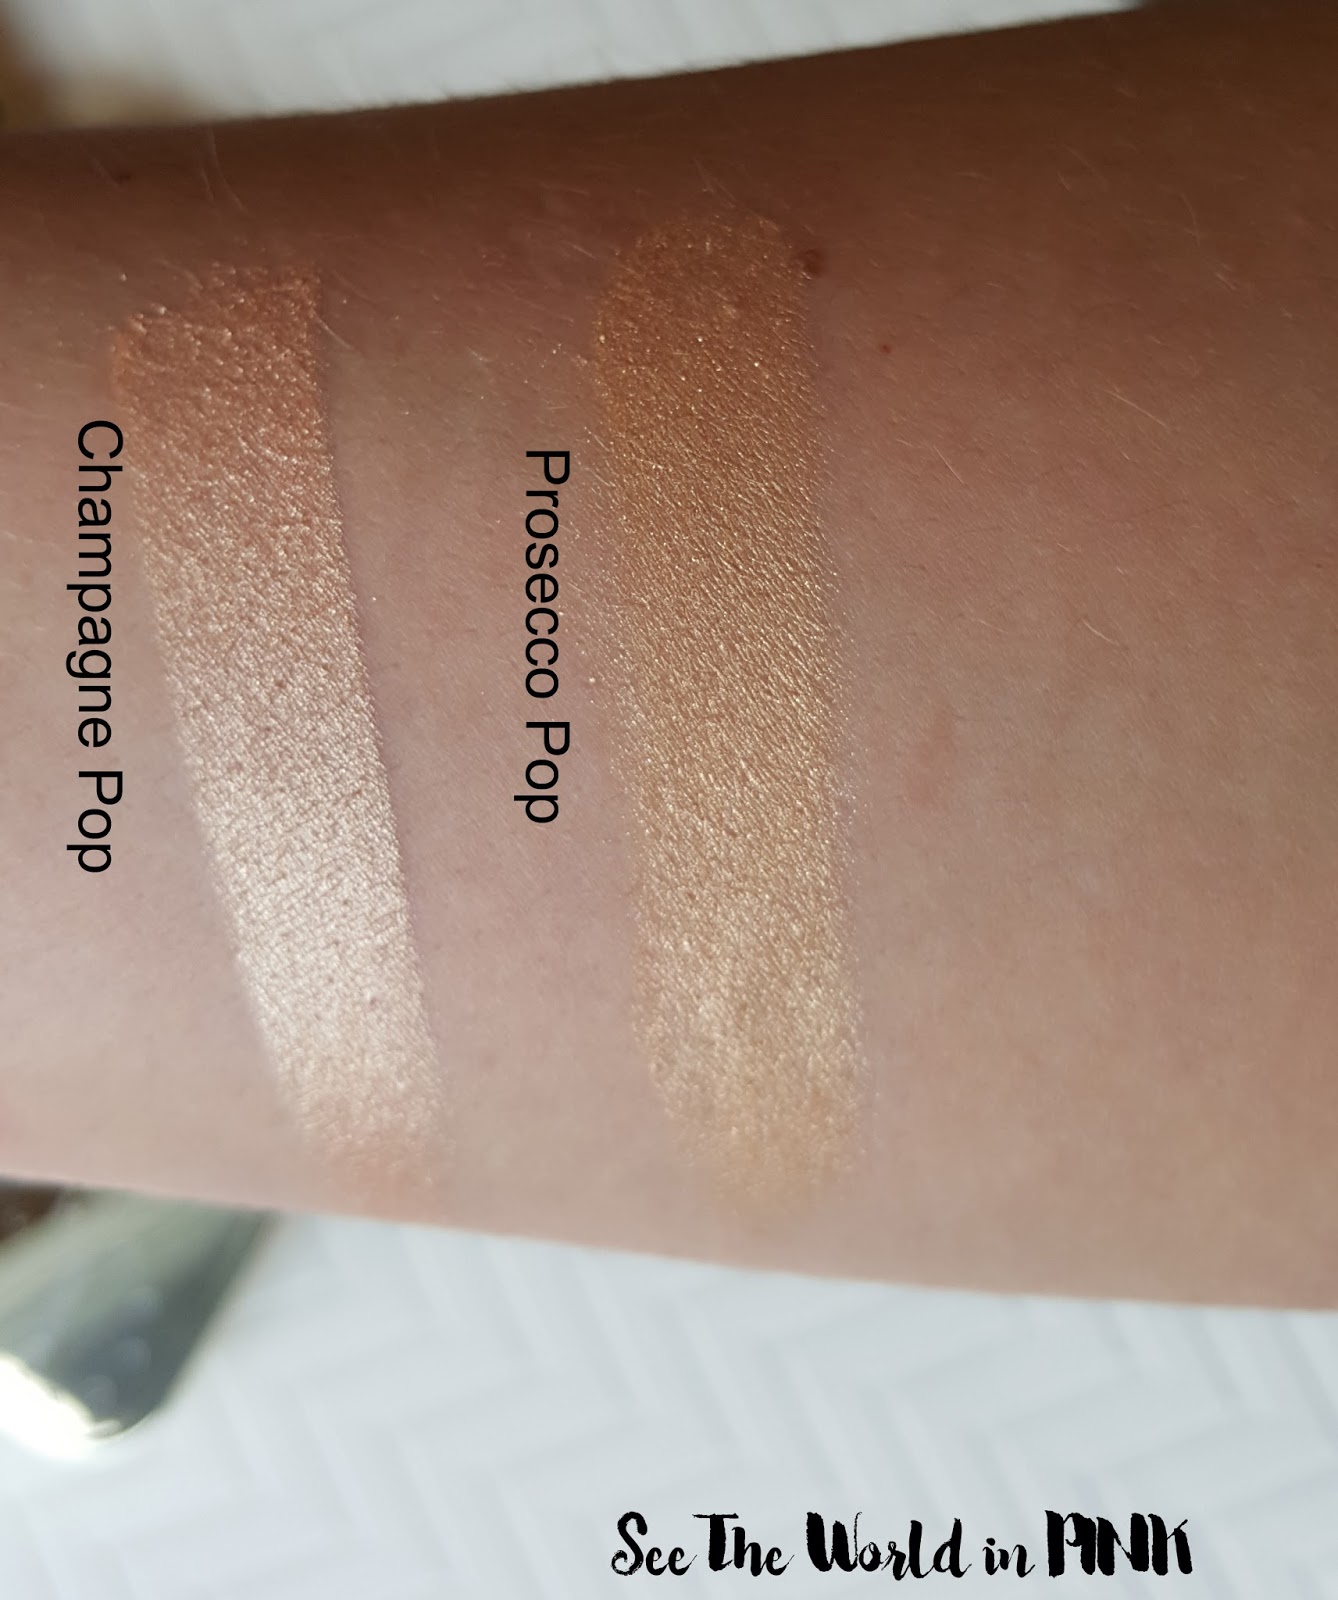 becca x jaclyn hill champagne glow collection face palette review